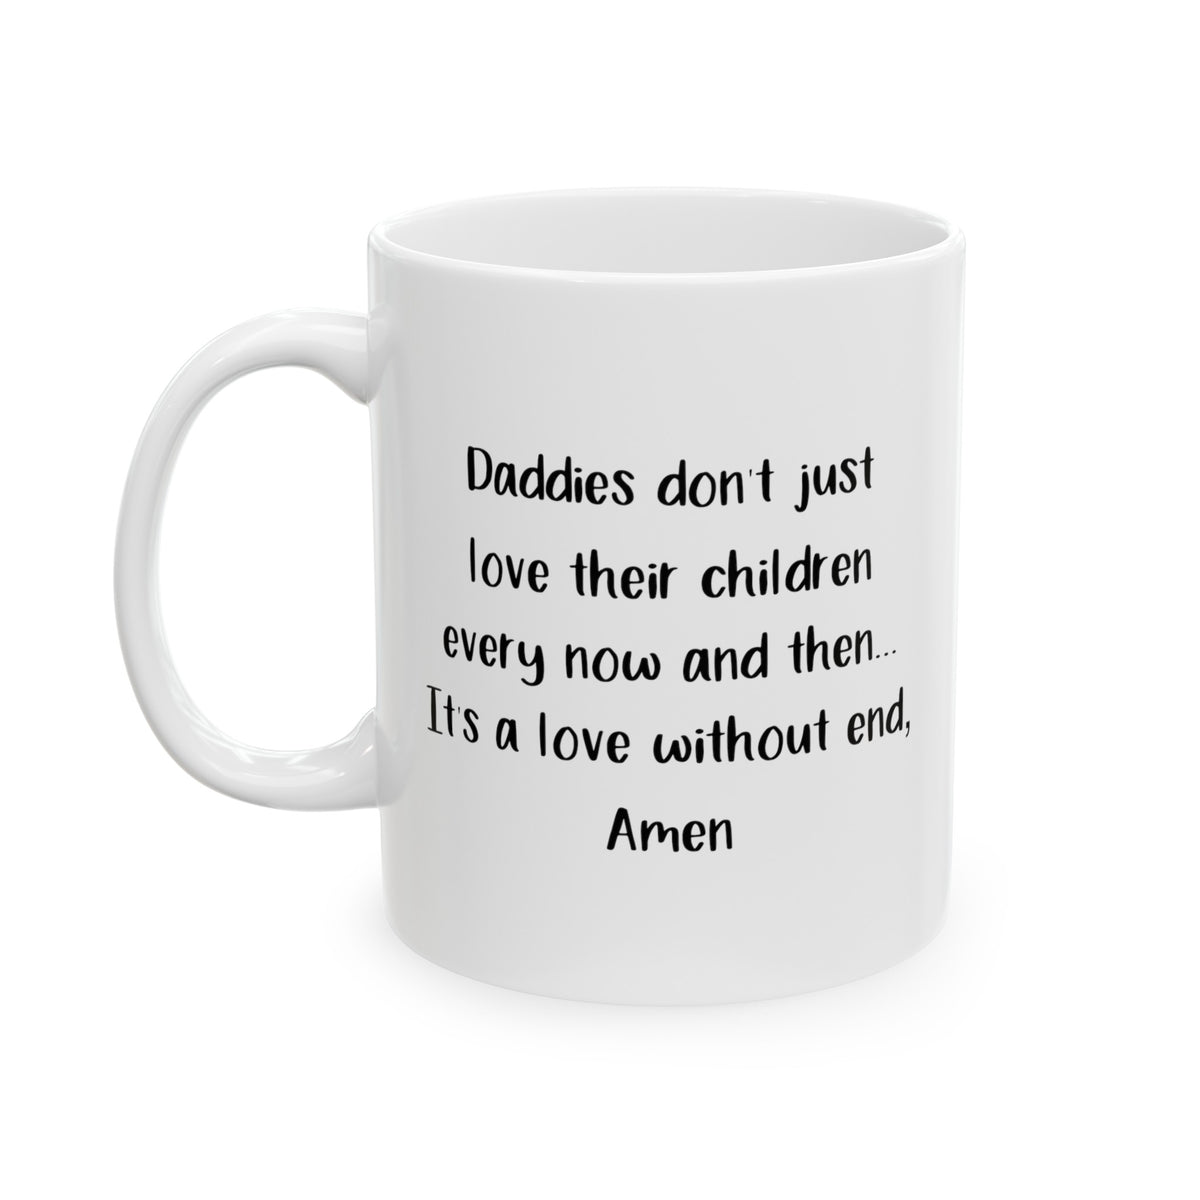 Daddies Don’t Just Love Their Children Every Now And Then...It’s a Love Without End, Amen Coffee Mug - 11oz Mug - Inspiration Gift For Dad